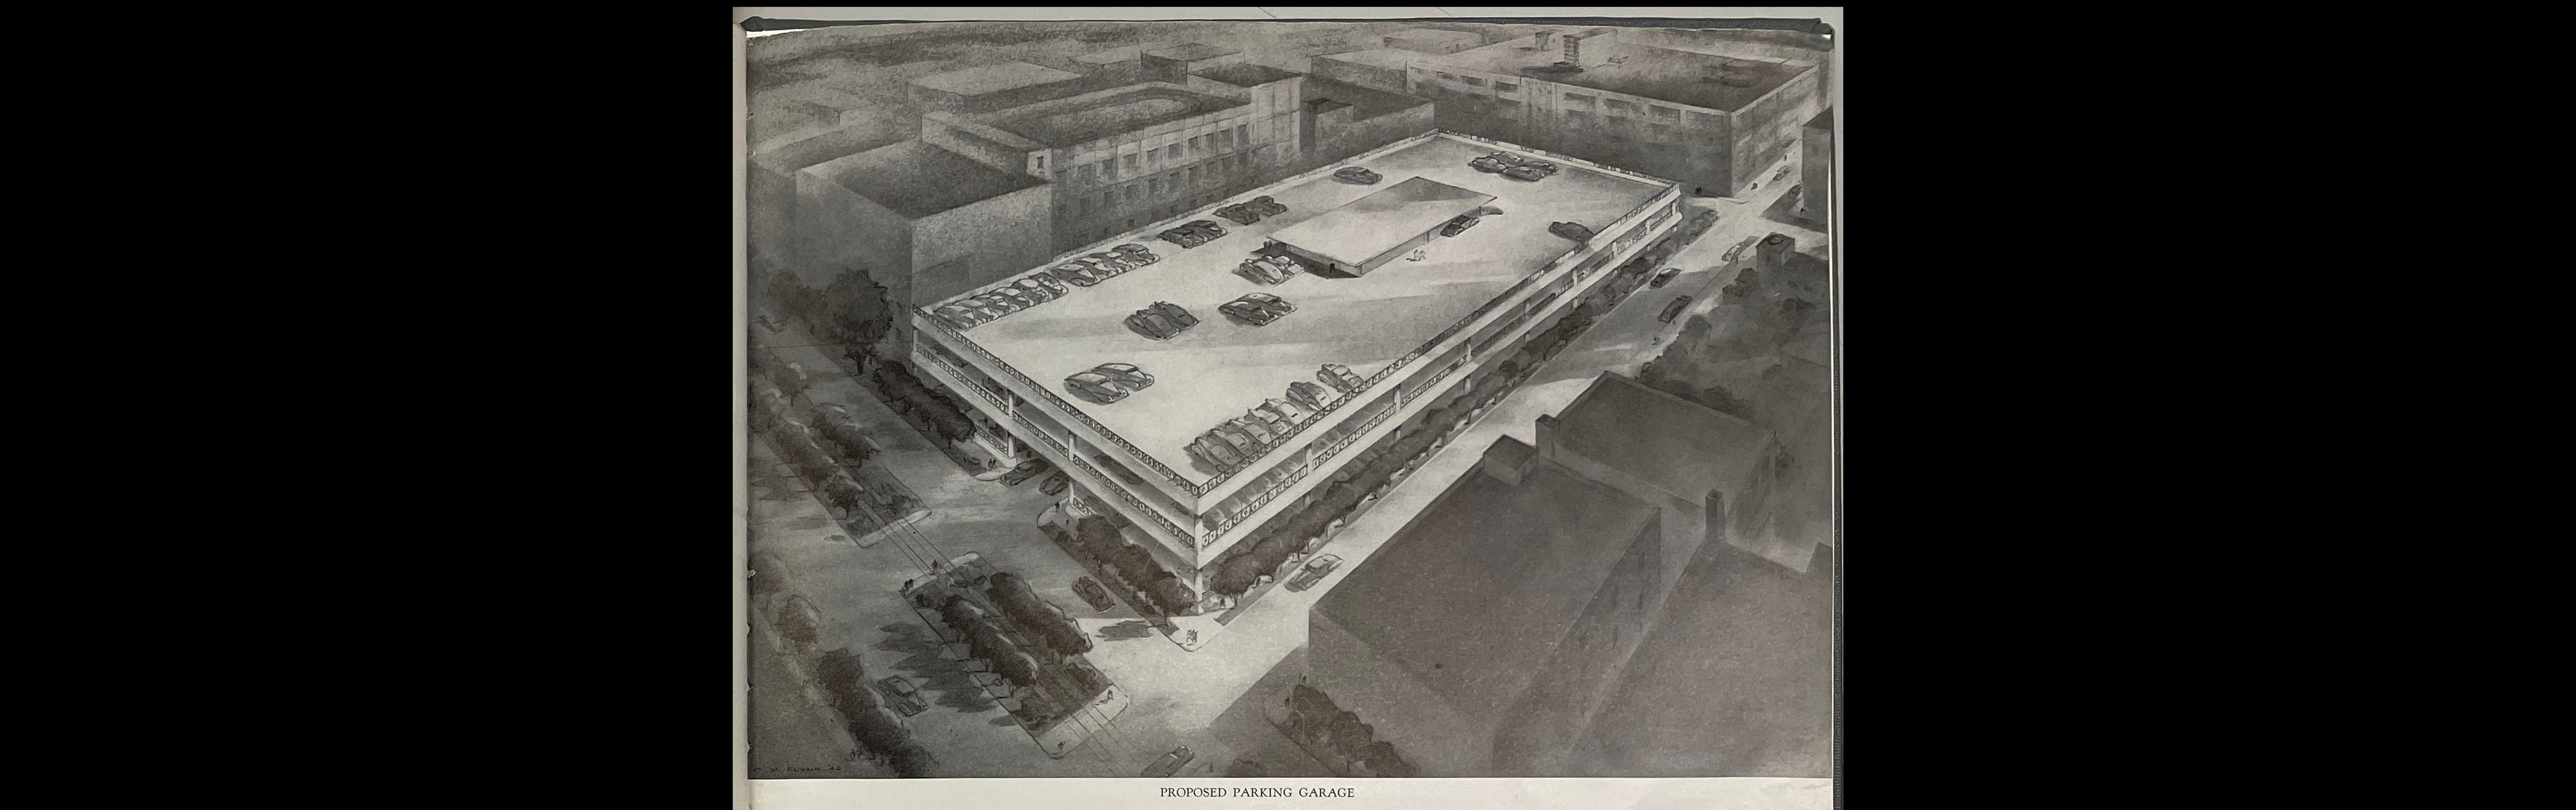 1946 illustration of a proposed parking garage in downtown New Orleans. From “Arterial Plan of New Orleans”.